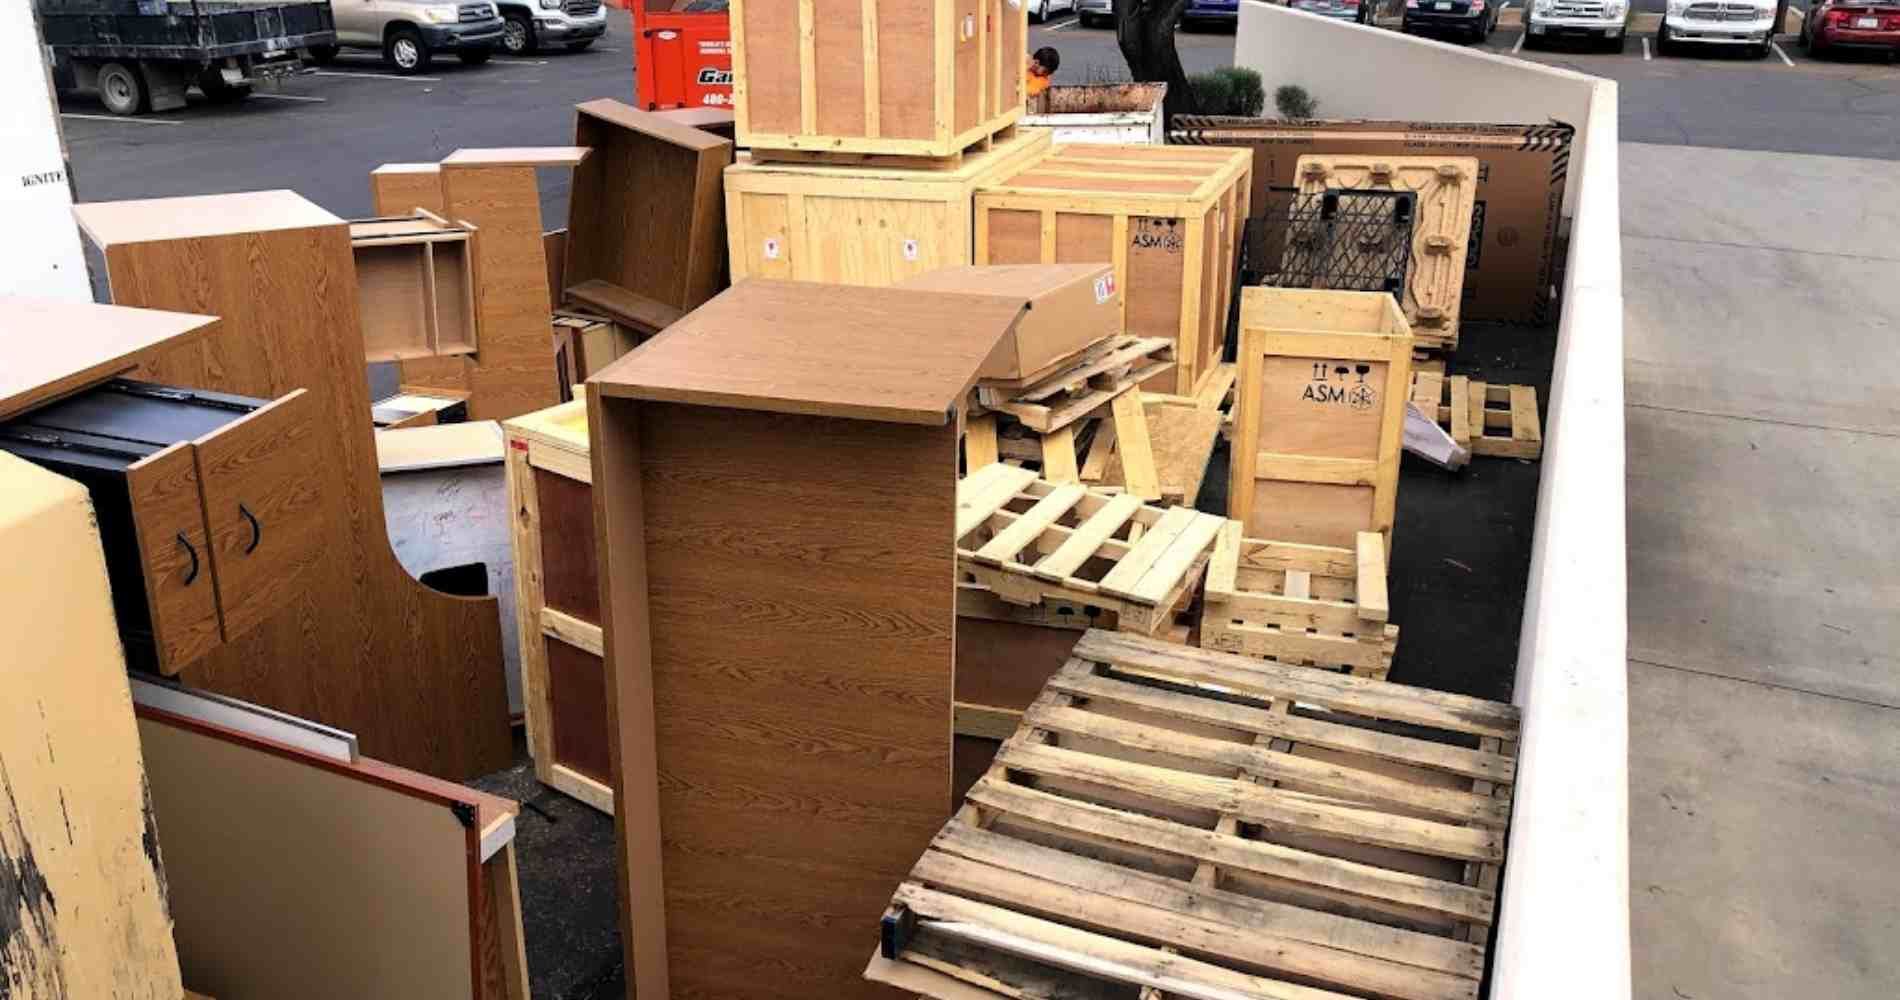 #1 for Pallet Disposal in Peoria, AZ With Over 1200 5-Star Reviews!